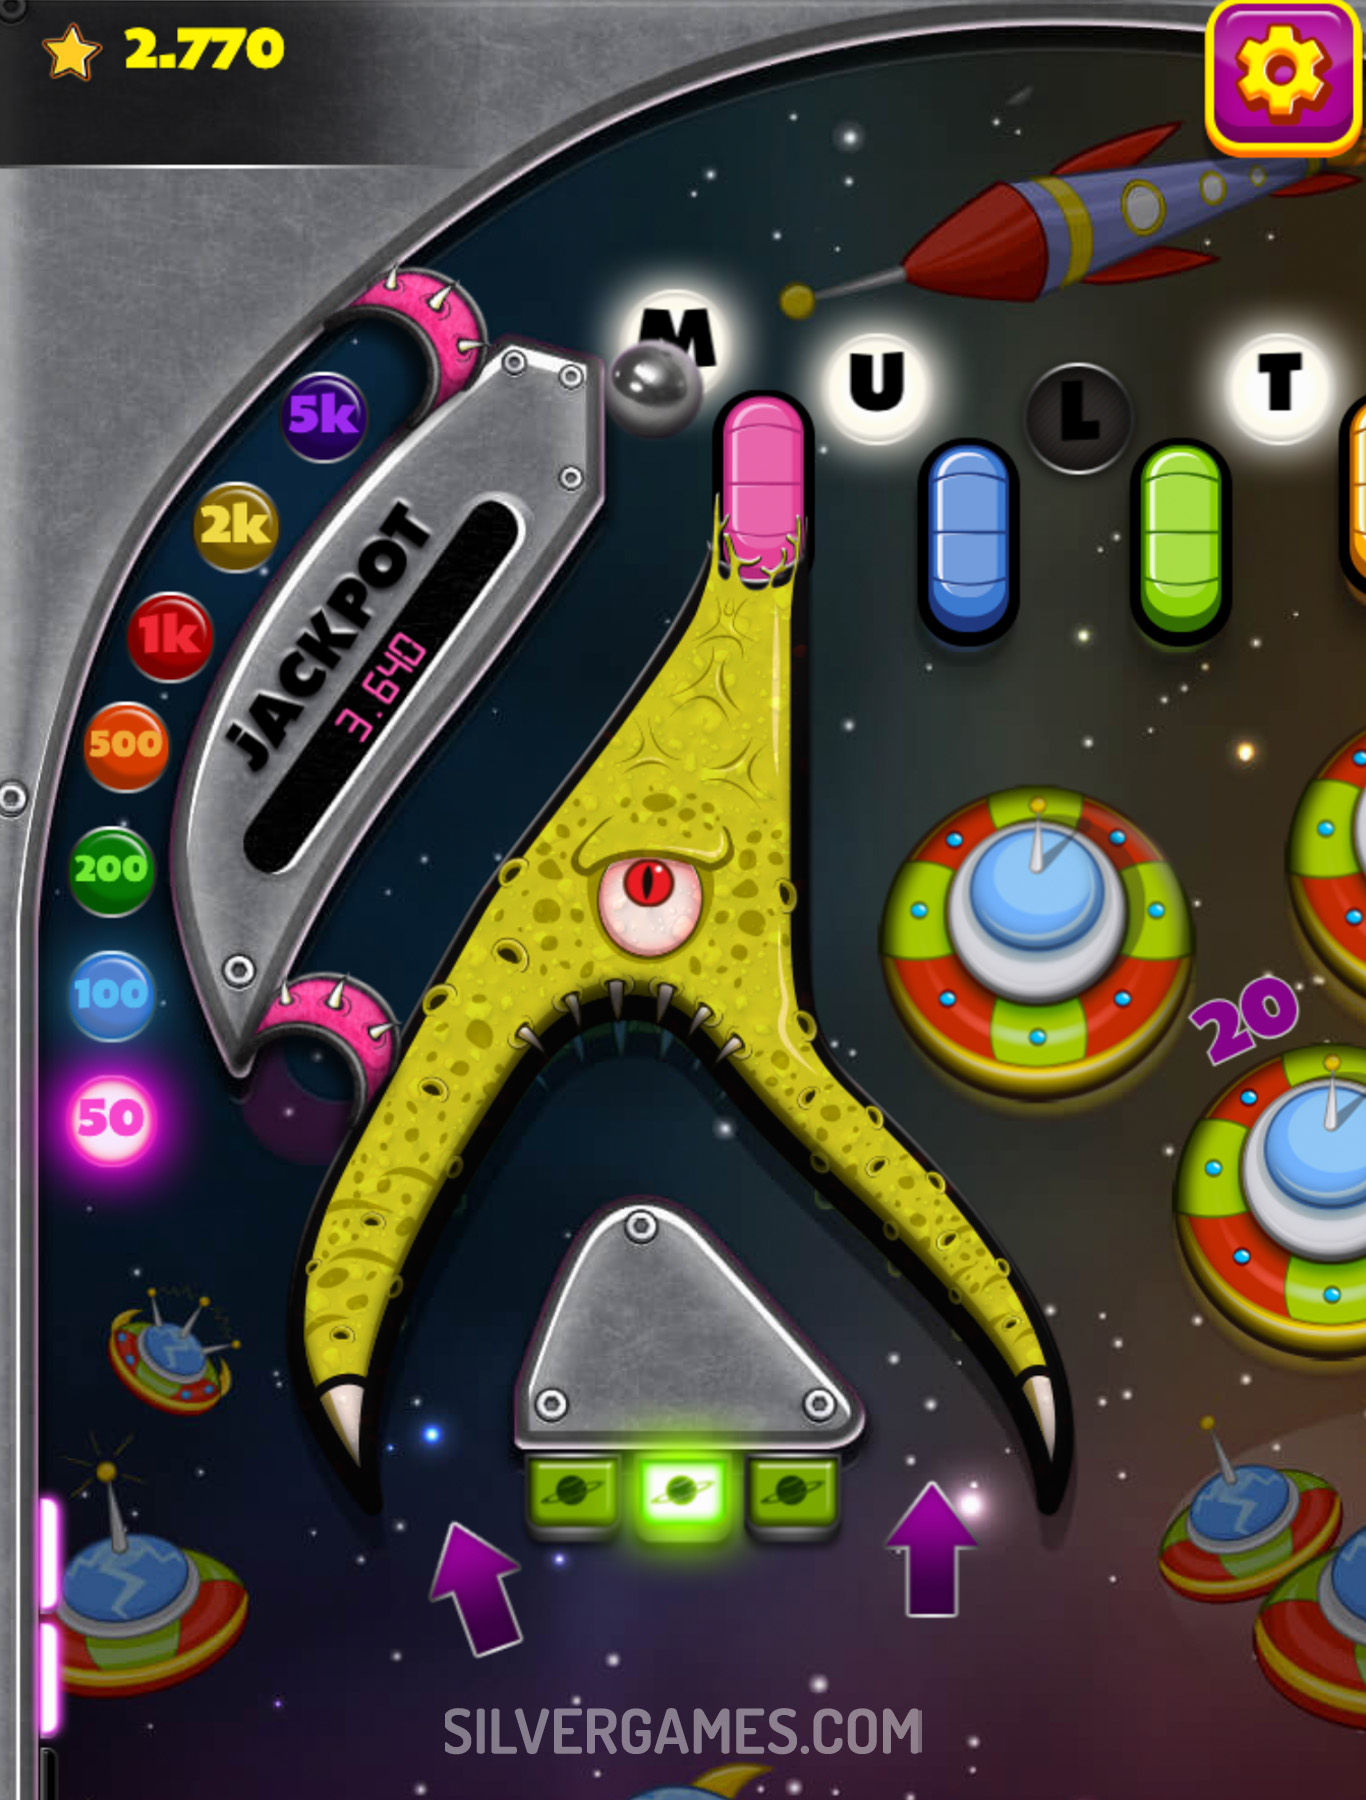 Space Adventure Pinball - 🕹️ Online Game